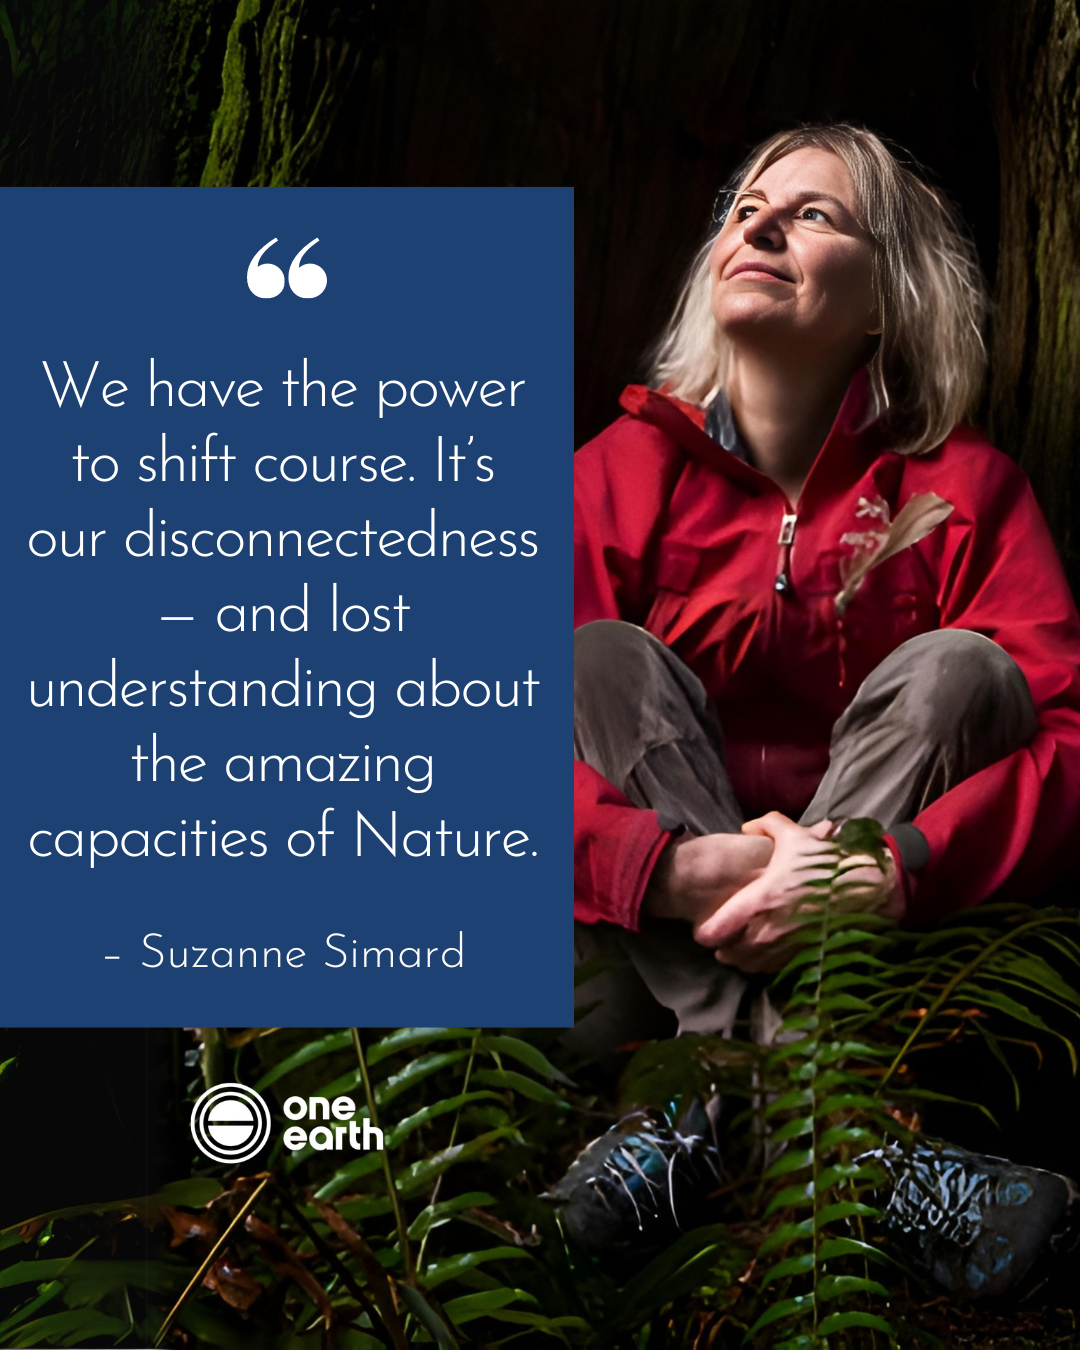 Suzanne Simard's research is guided by her deep connection to the land and her time spent amongst the trees. Image Credit: The Mother Tree Project.